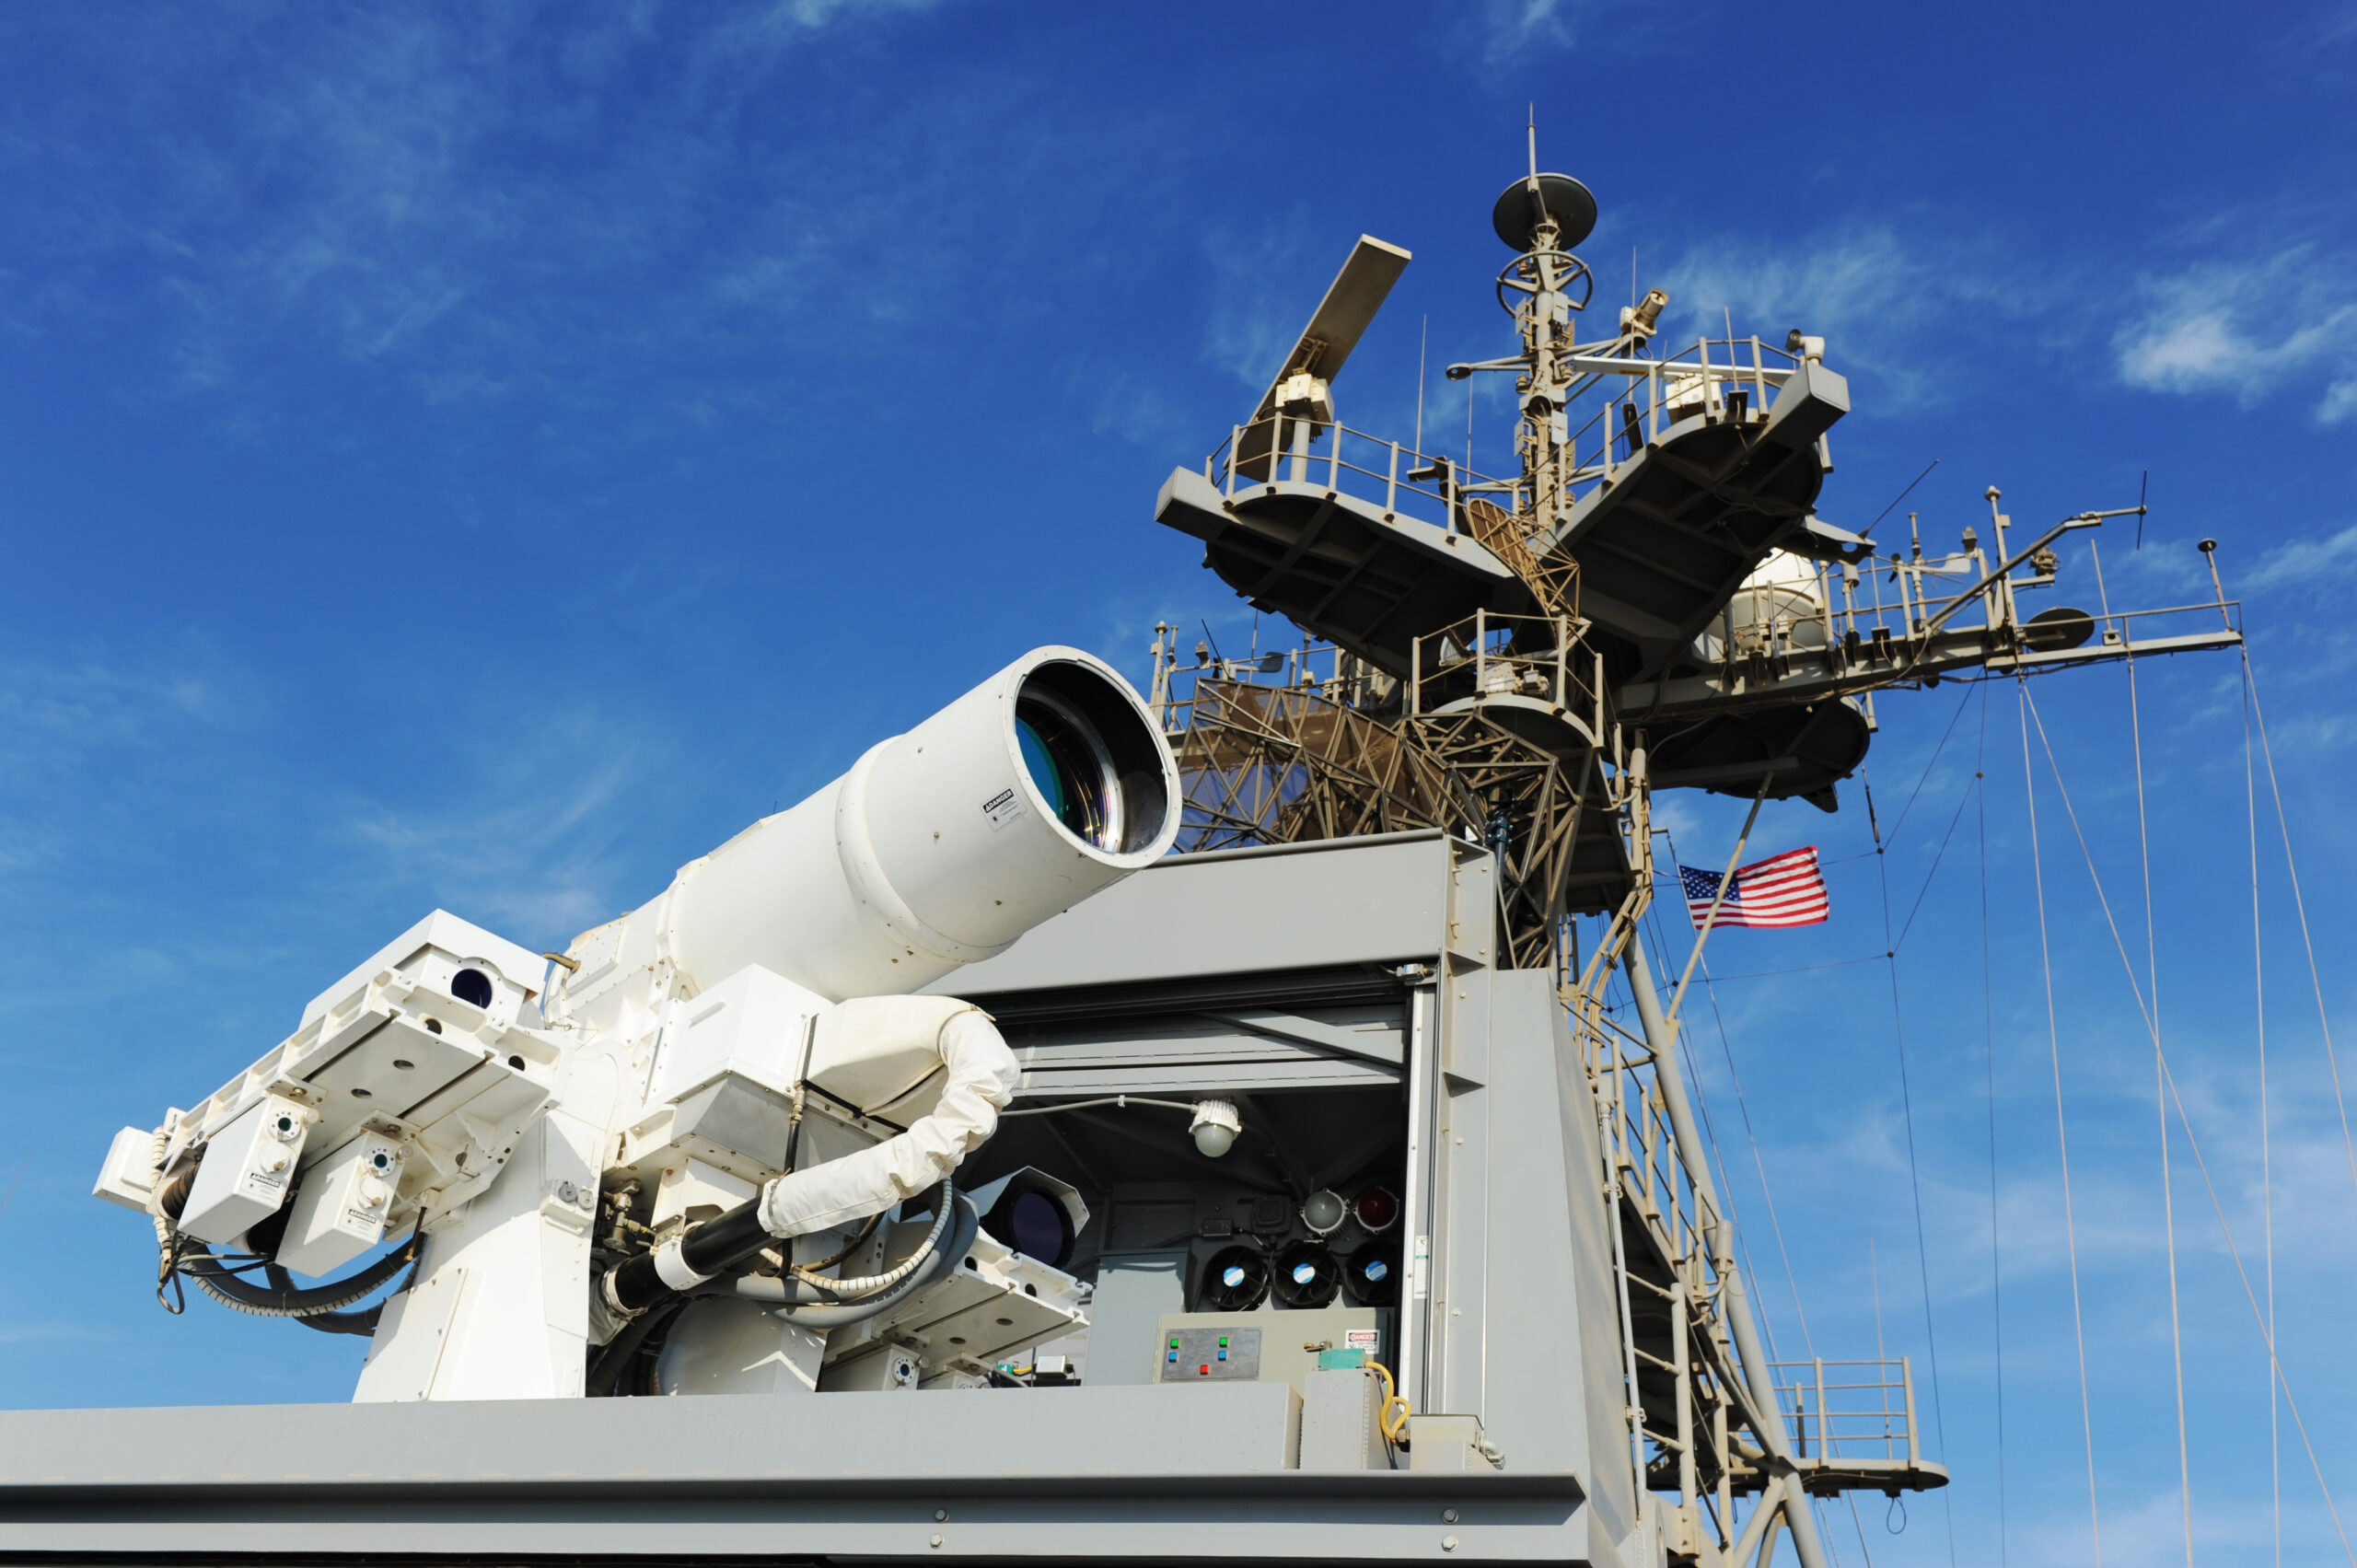 The Afloat Forward Staging Base USS Ponce conducts an operational demonstration of the Office of Naval Research -sponsored Laser Weapon System while deployed to the Arabian Gulf